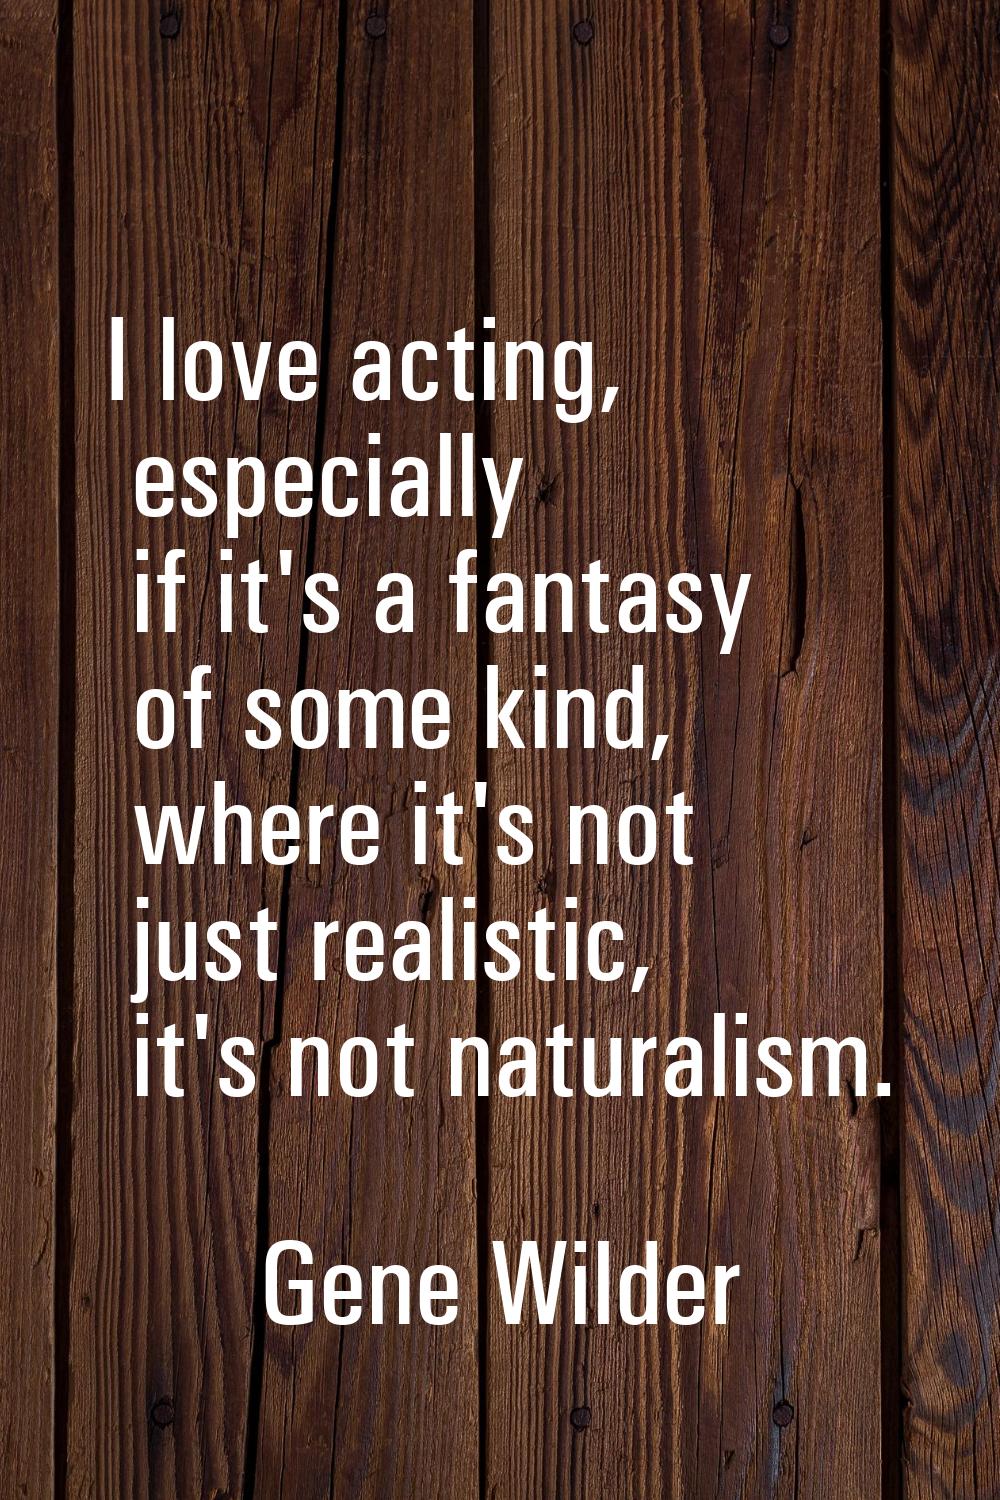 I love acting, especially if it's a fantasy of some kind, where it's not just realistic, it's not n